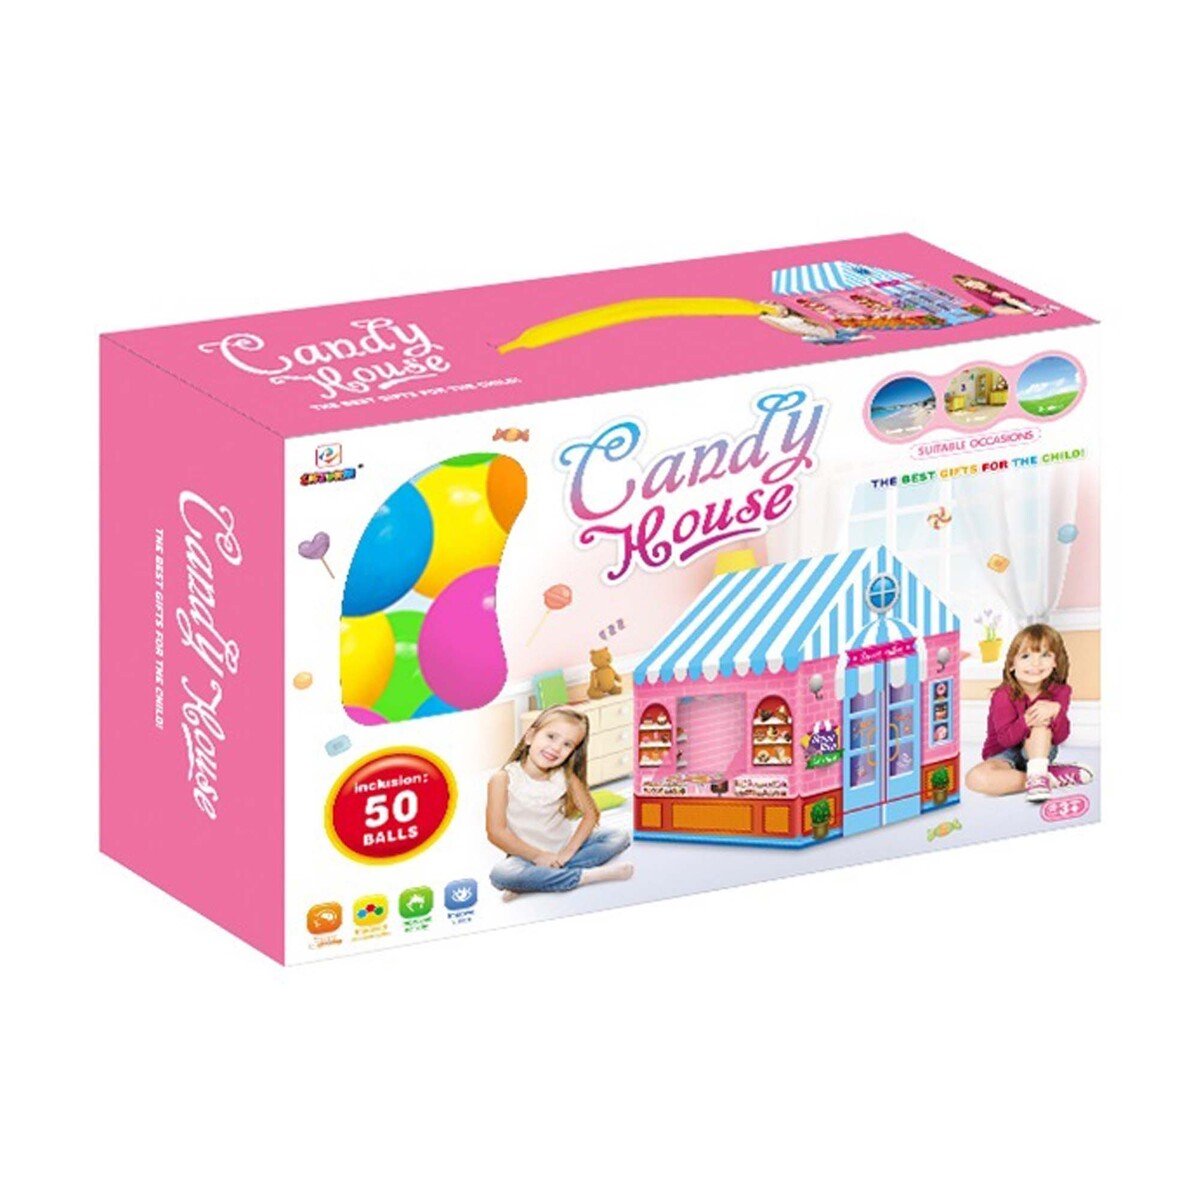 Fabiola Candy Play Tent With Ball 995-5009C